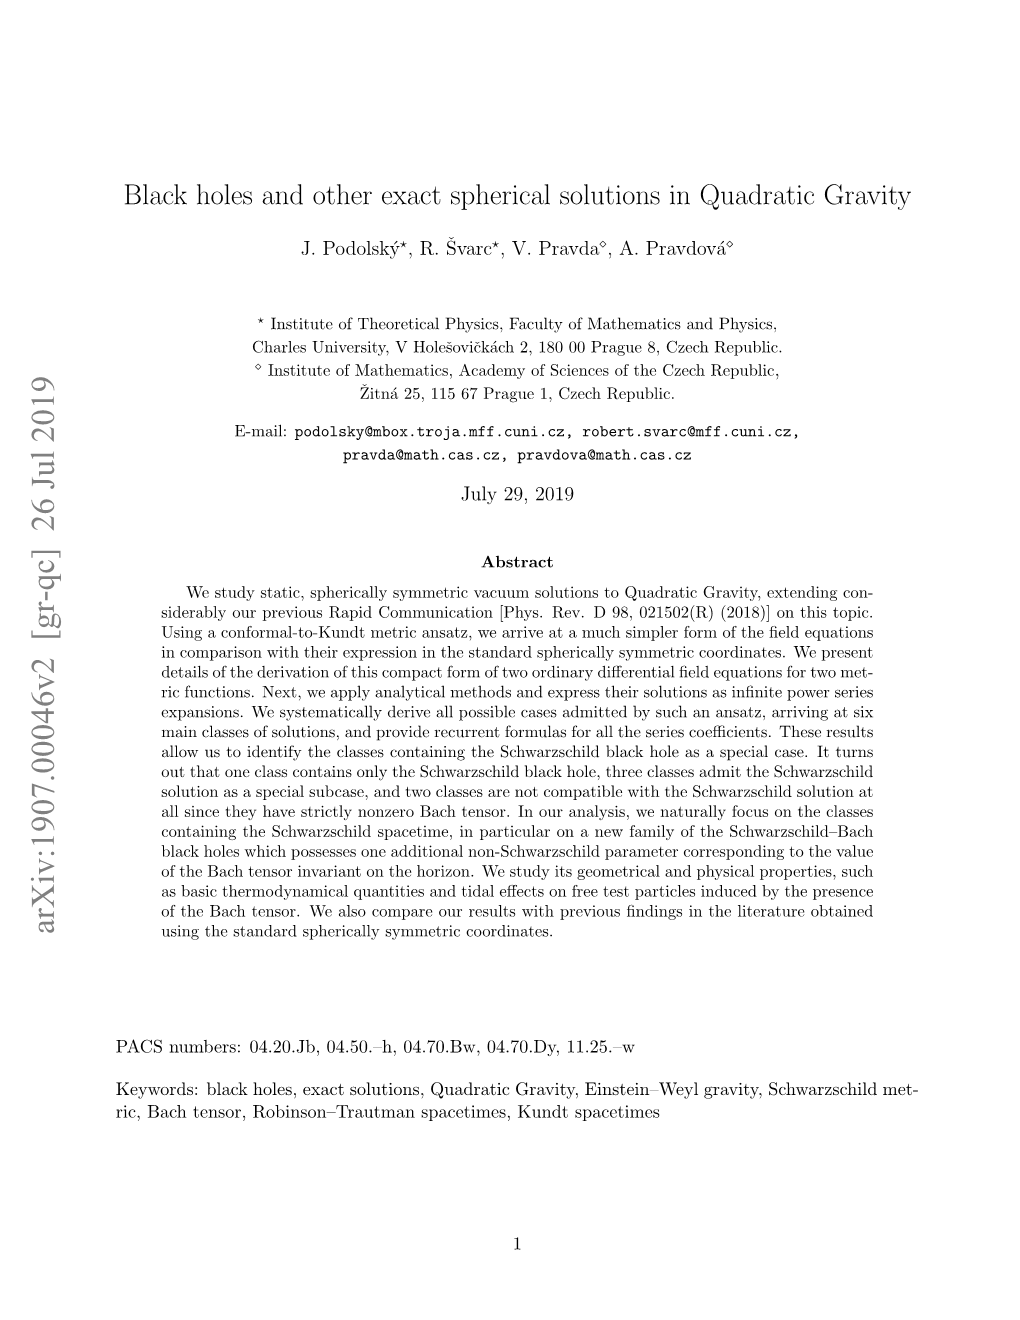 Black Holes and Other Exact Spherical Solutions in Quadratic Gravity